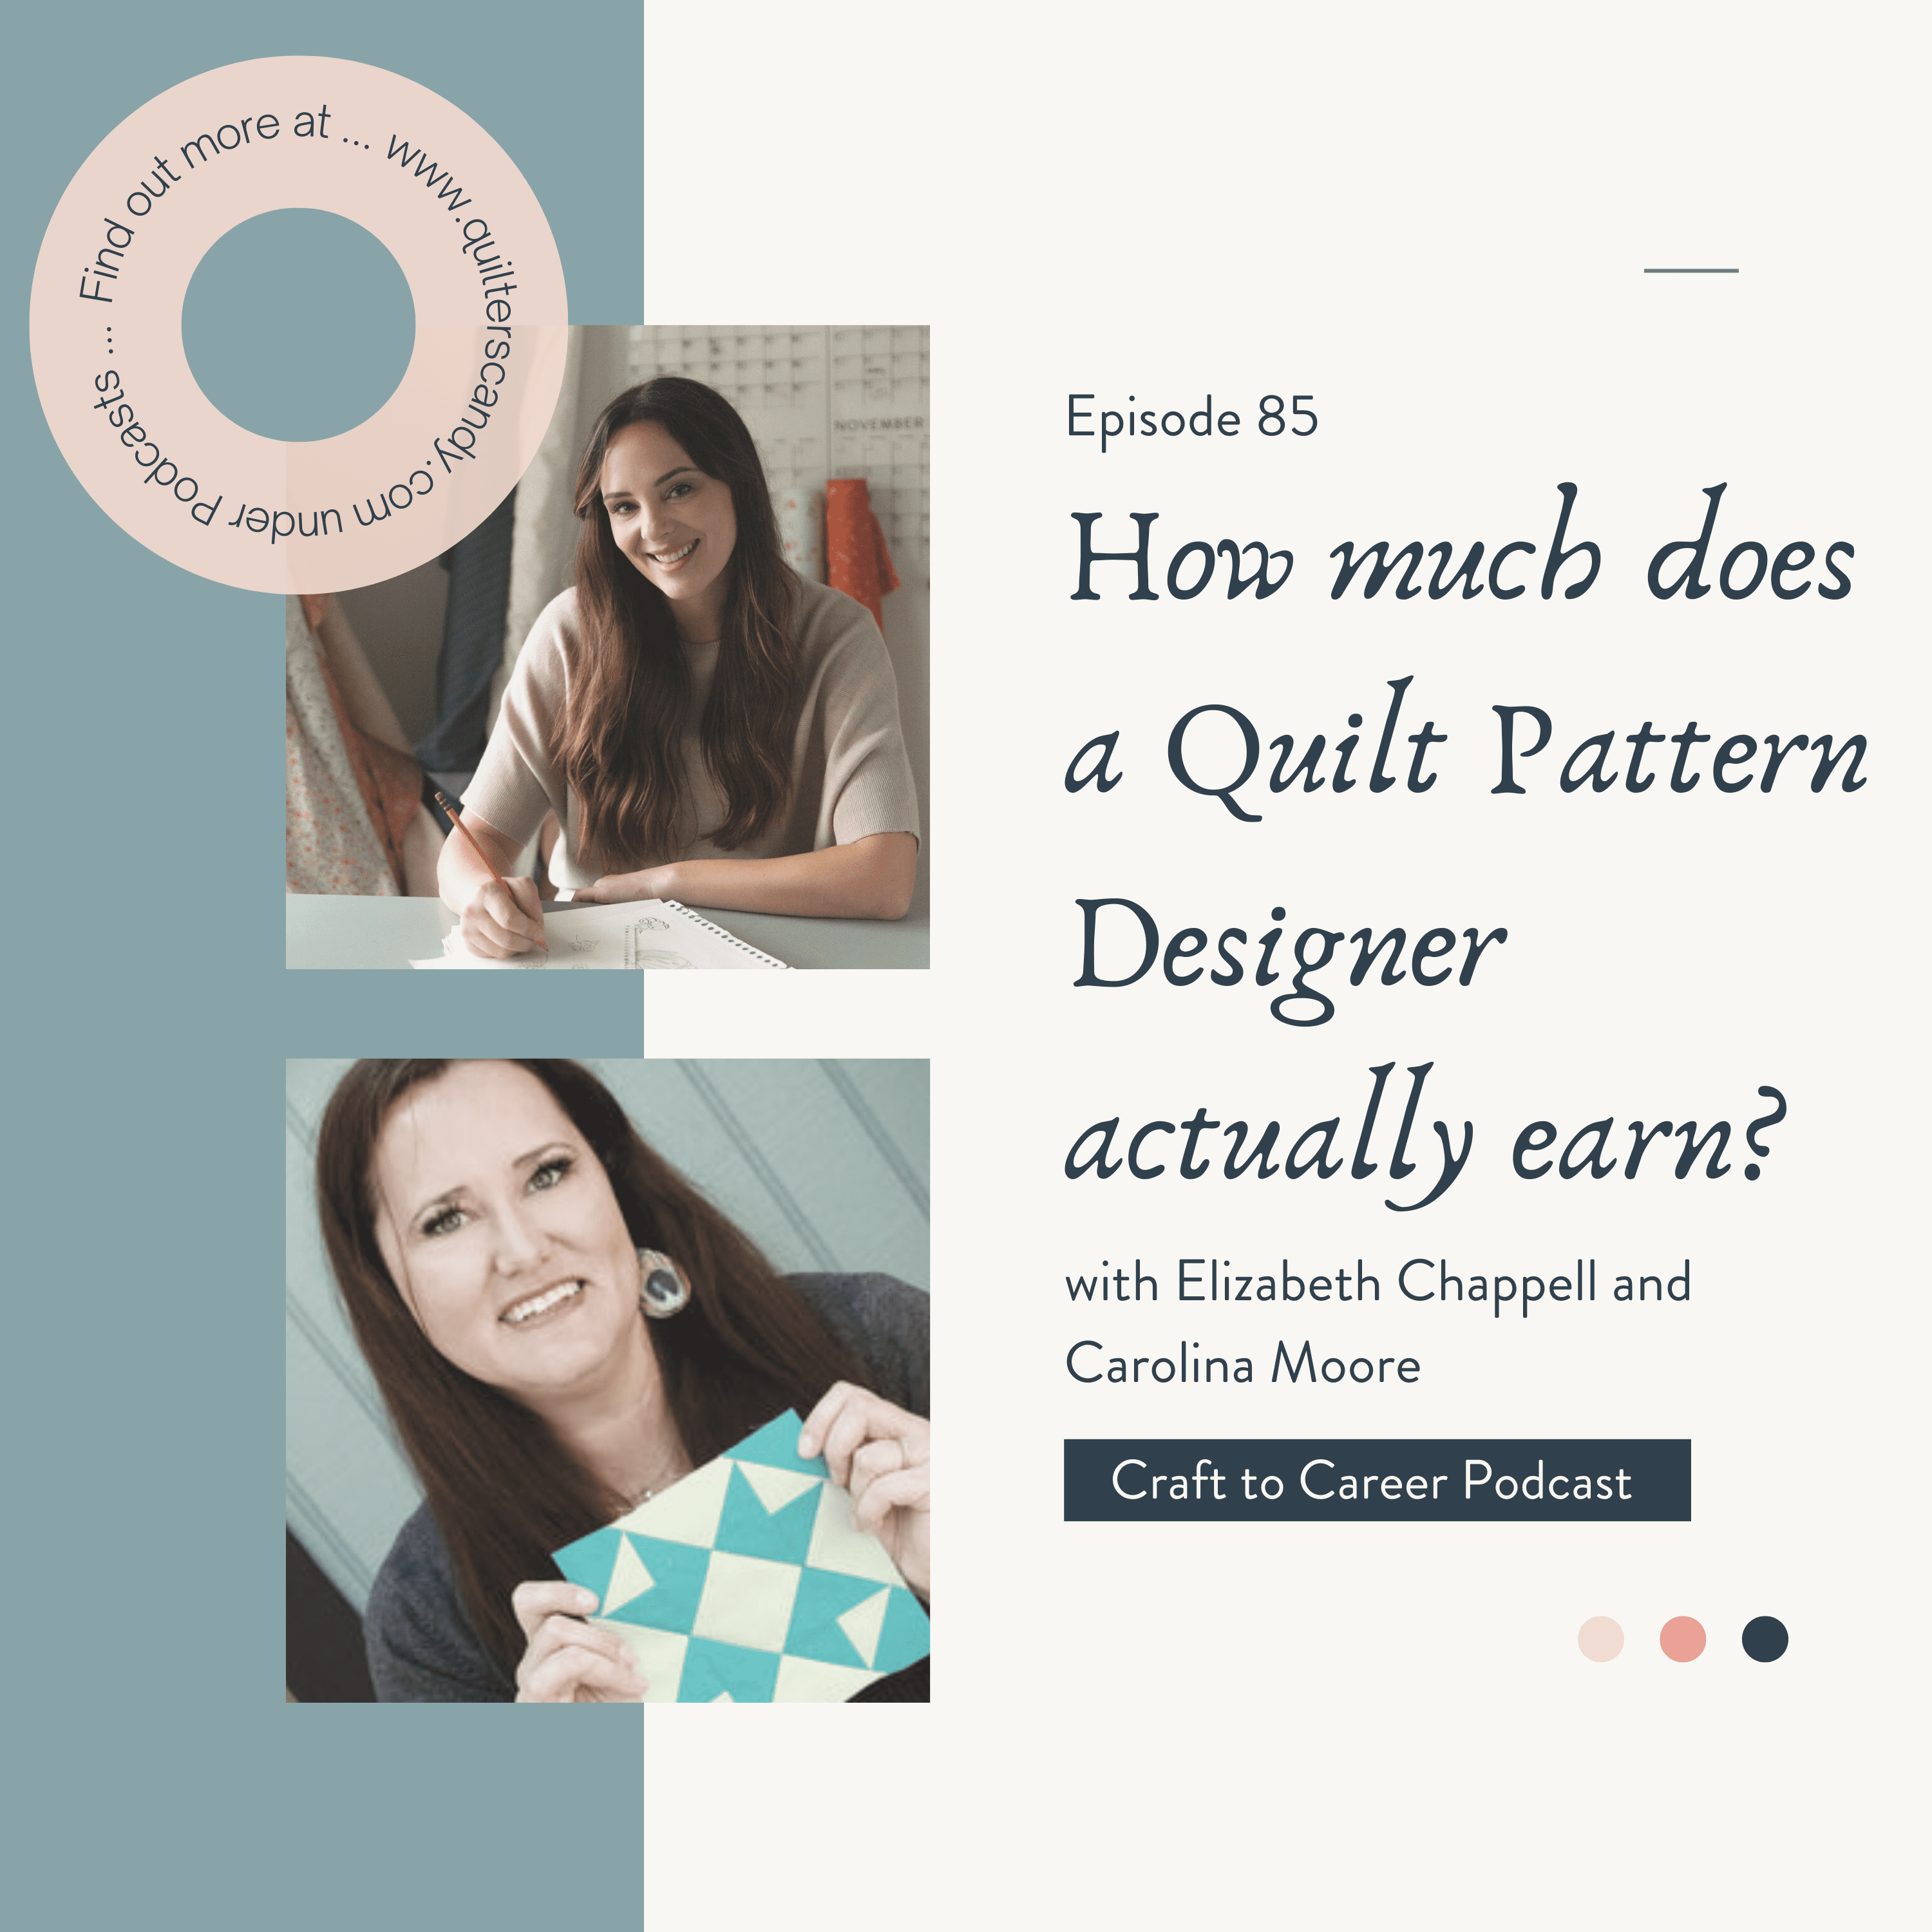 https://quilterscandy.com/wp-content/uploads/2022/11/How-much-does-a-Quilt-Pattern-Designer-actually-earn-1.png